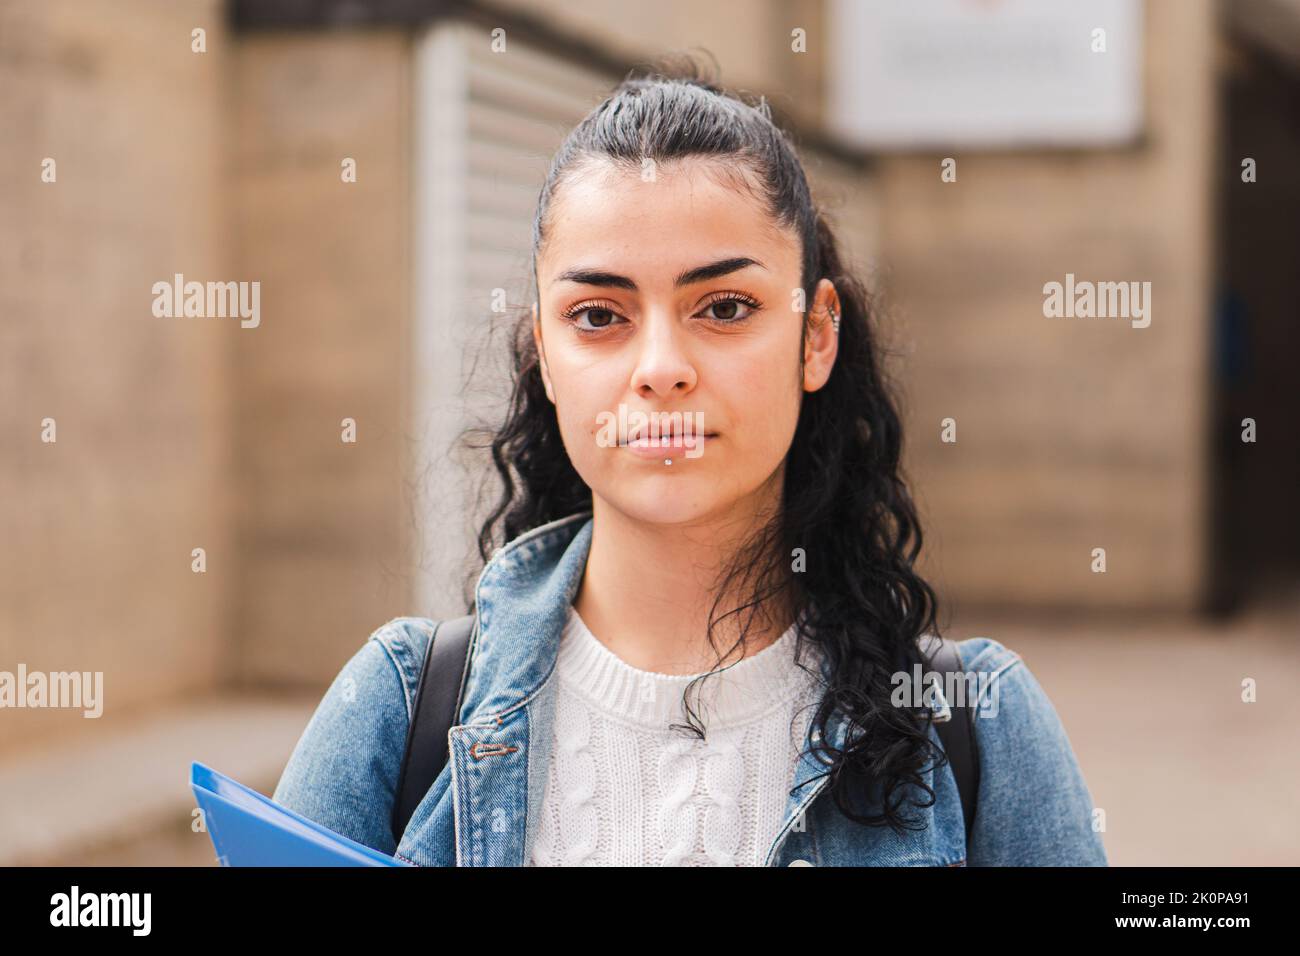 Young hispanic serious girl brunette student looking serious at camera. Juvenile teenage lady standing at university campus. Education concept. Stock Photo